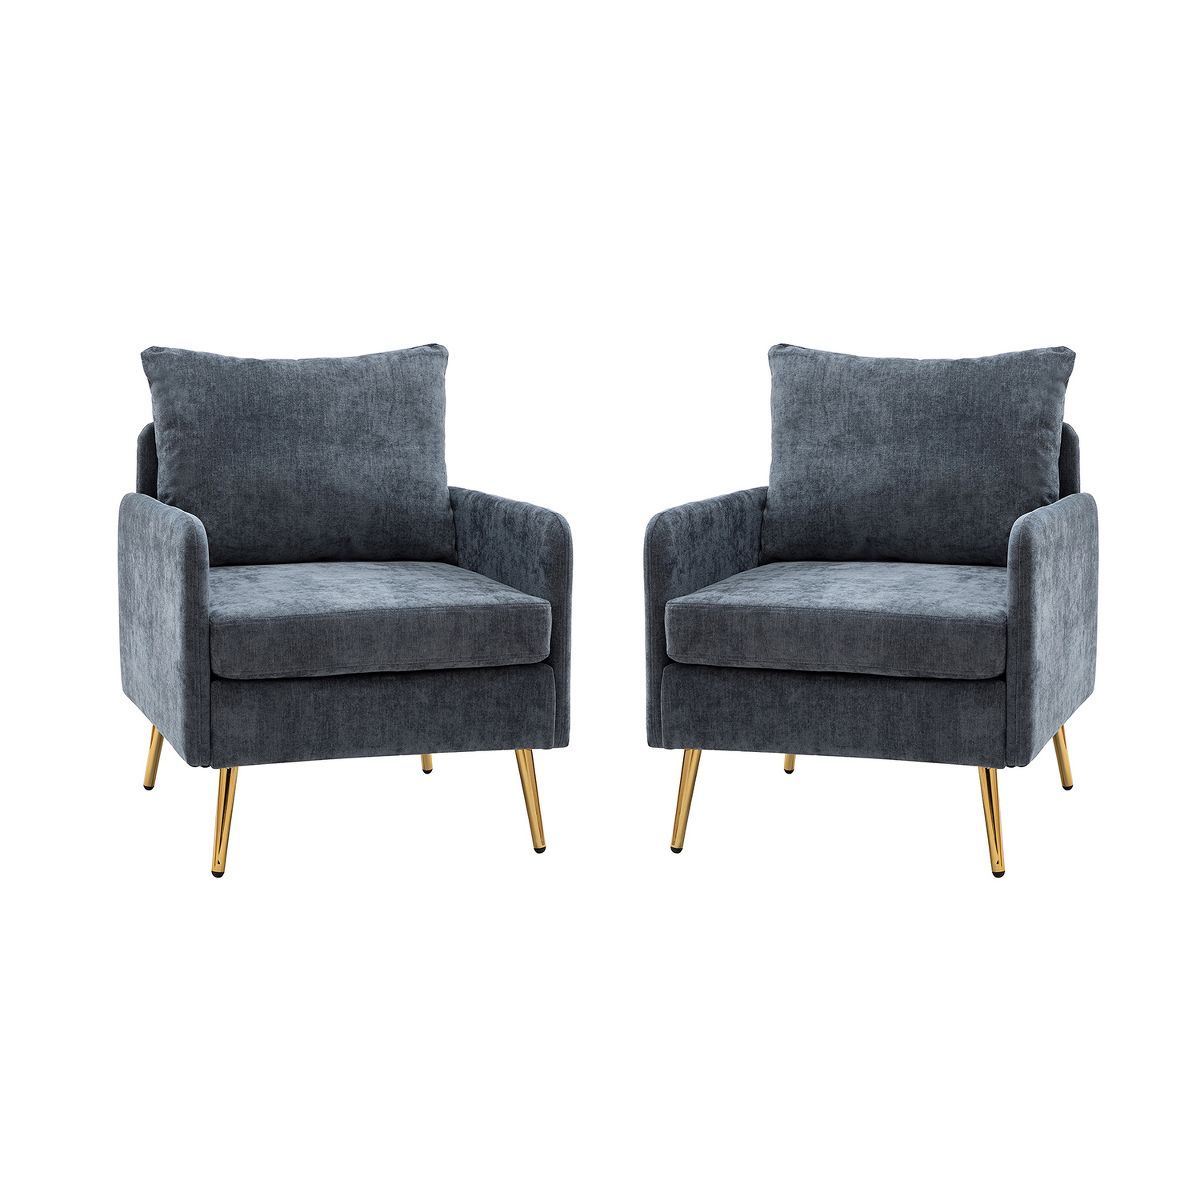 Set of 2 Giovann Wooden Upholstered Accent Chair Comfy Armchair | Karat Home | Target